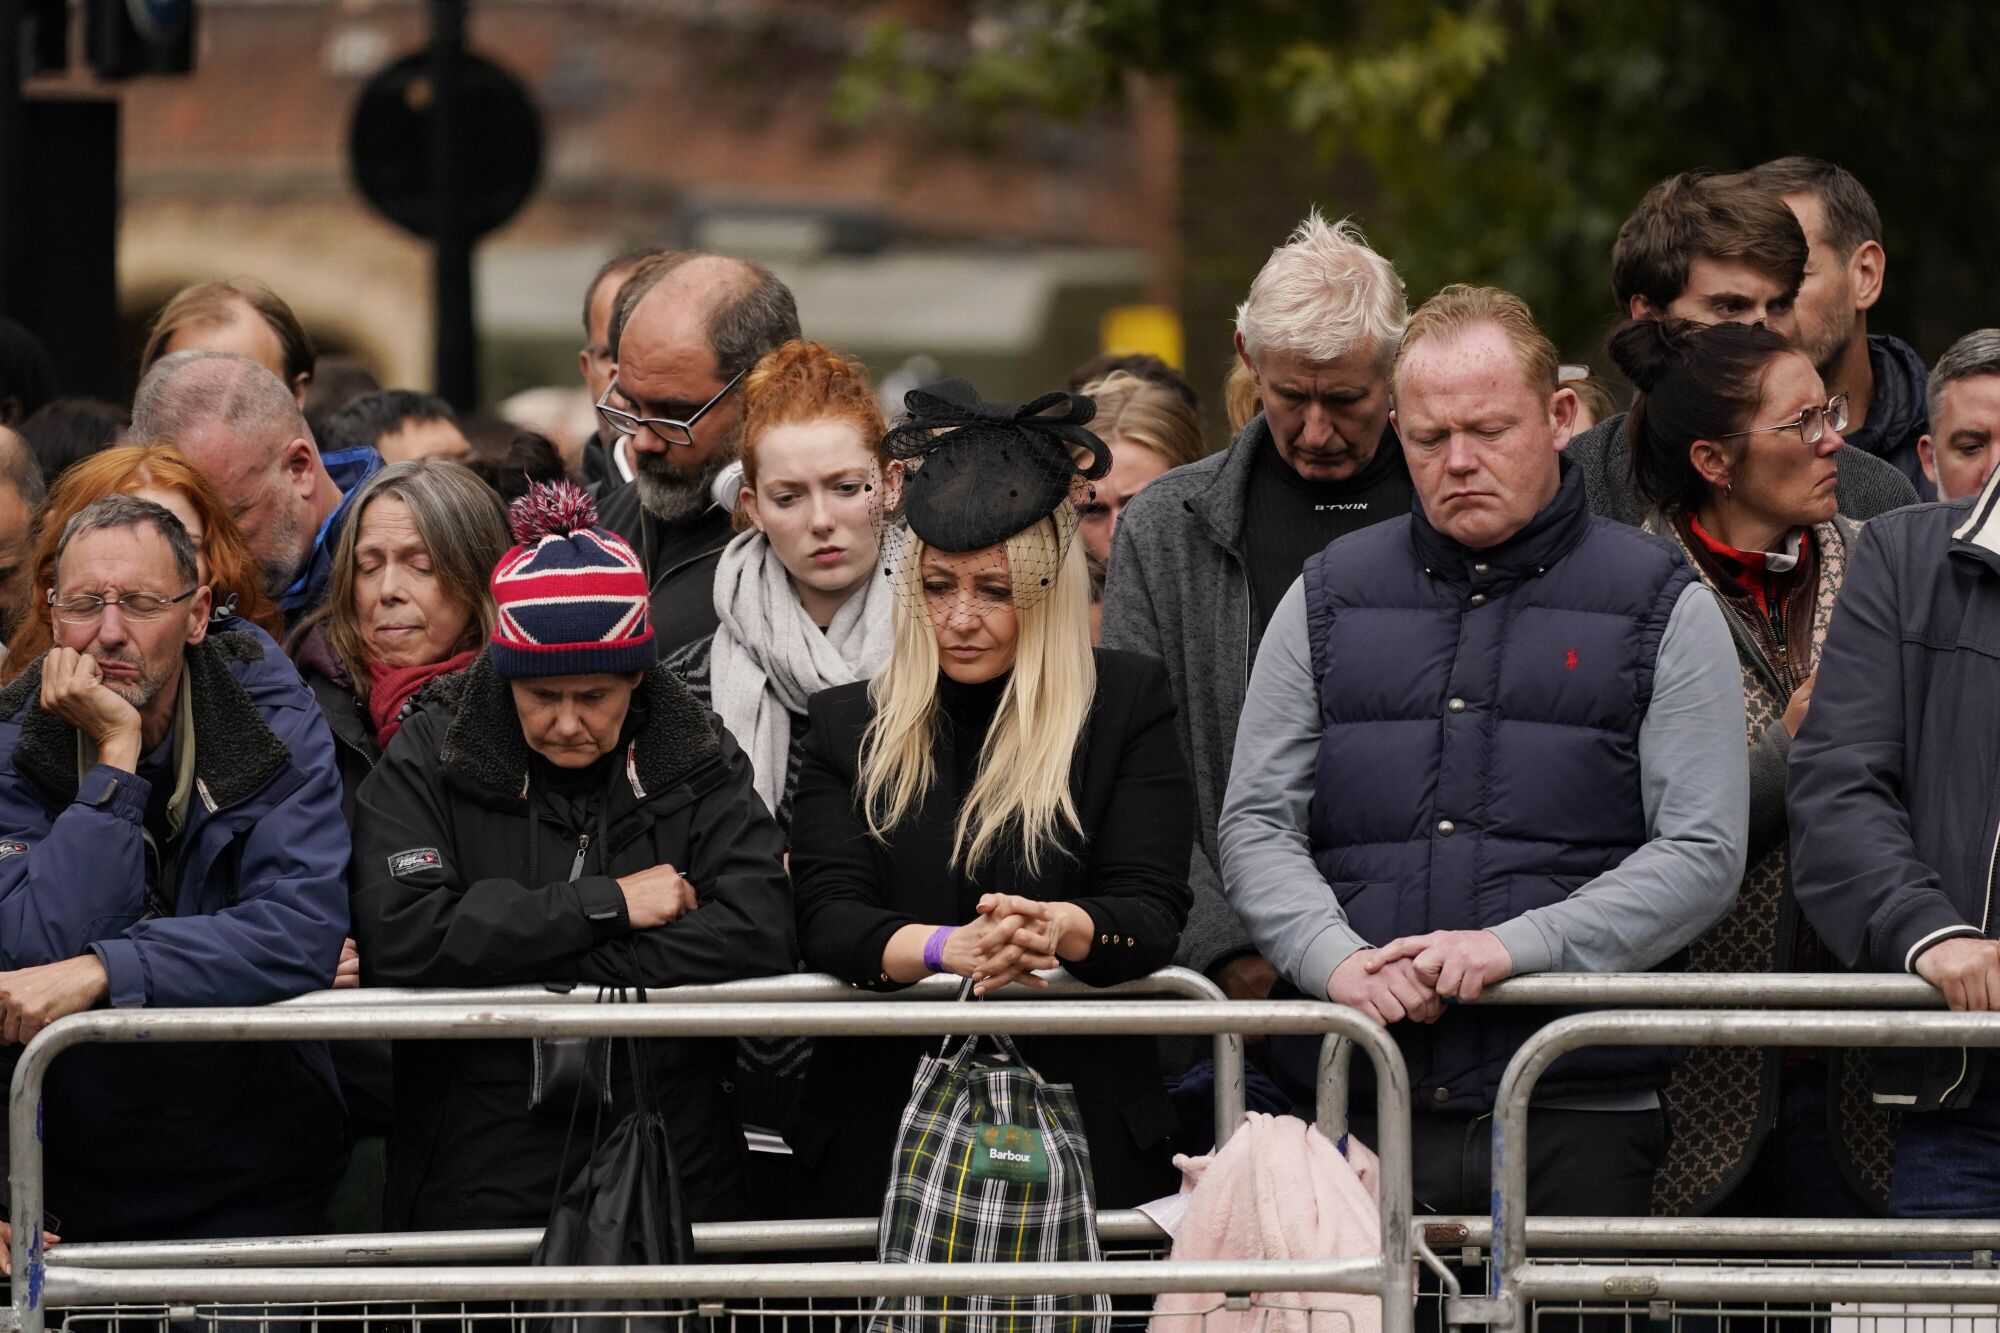 Members of the public listen to the funeral service of Queen Elizabeth II in central London on Monday.